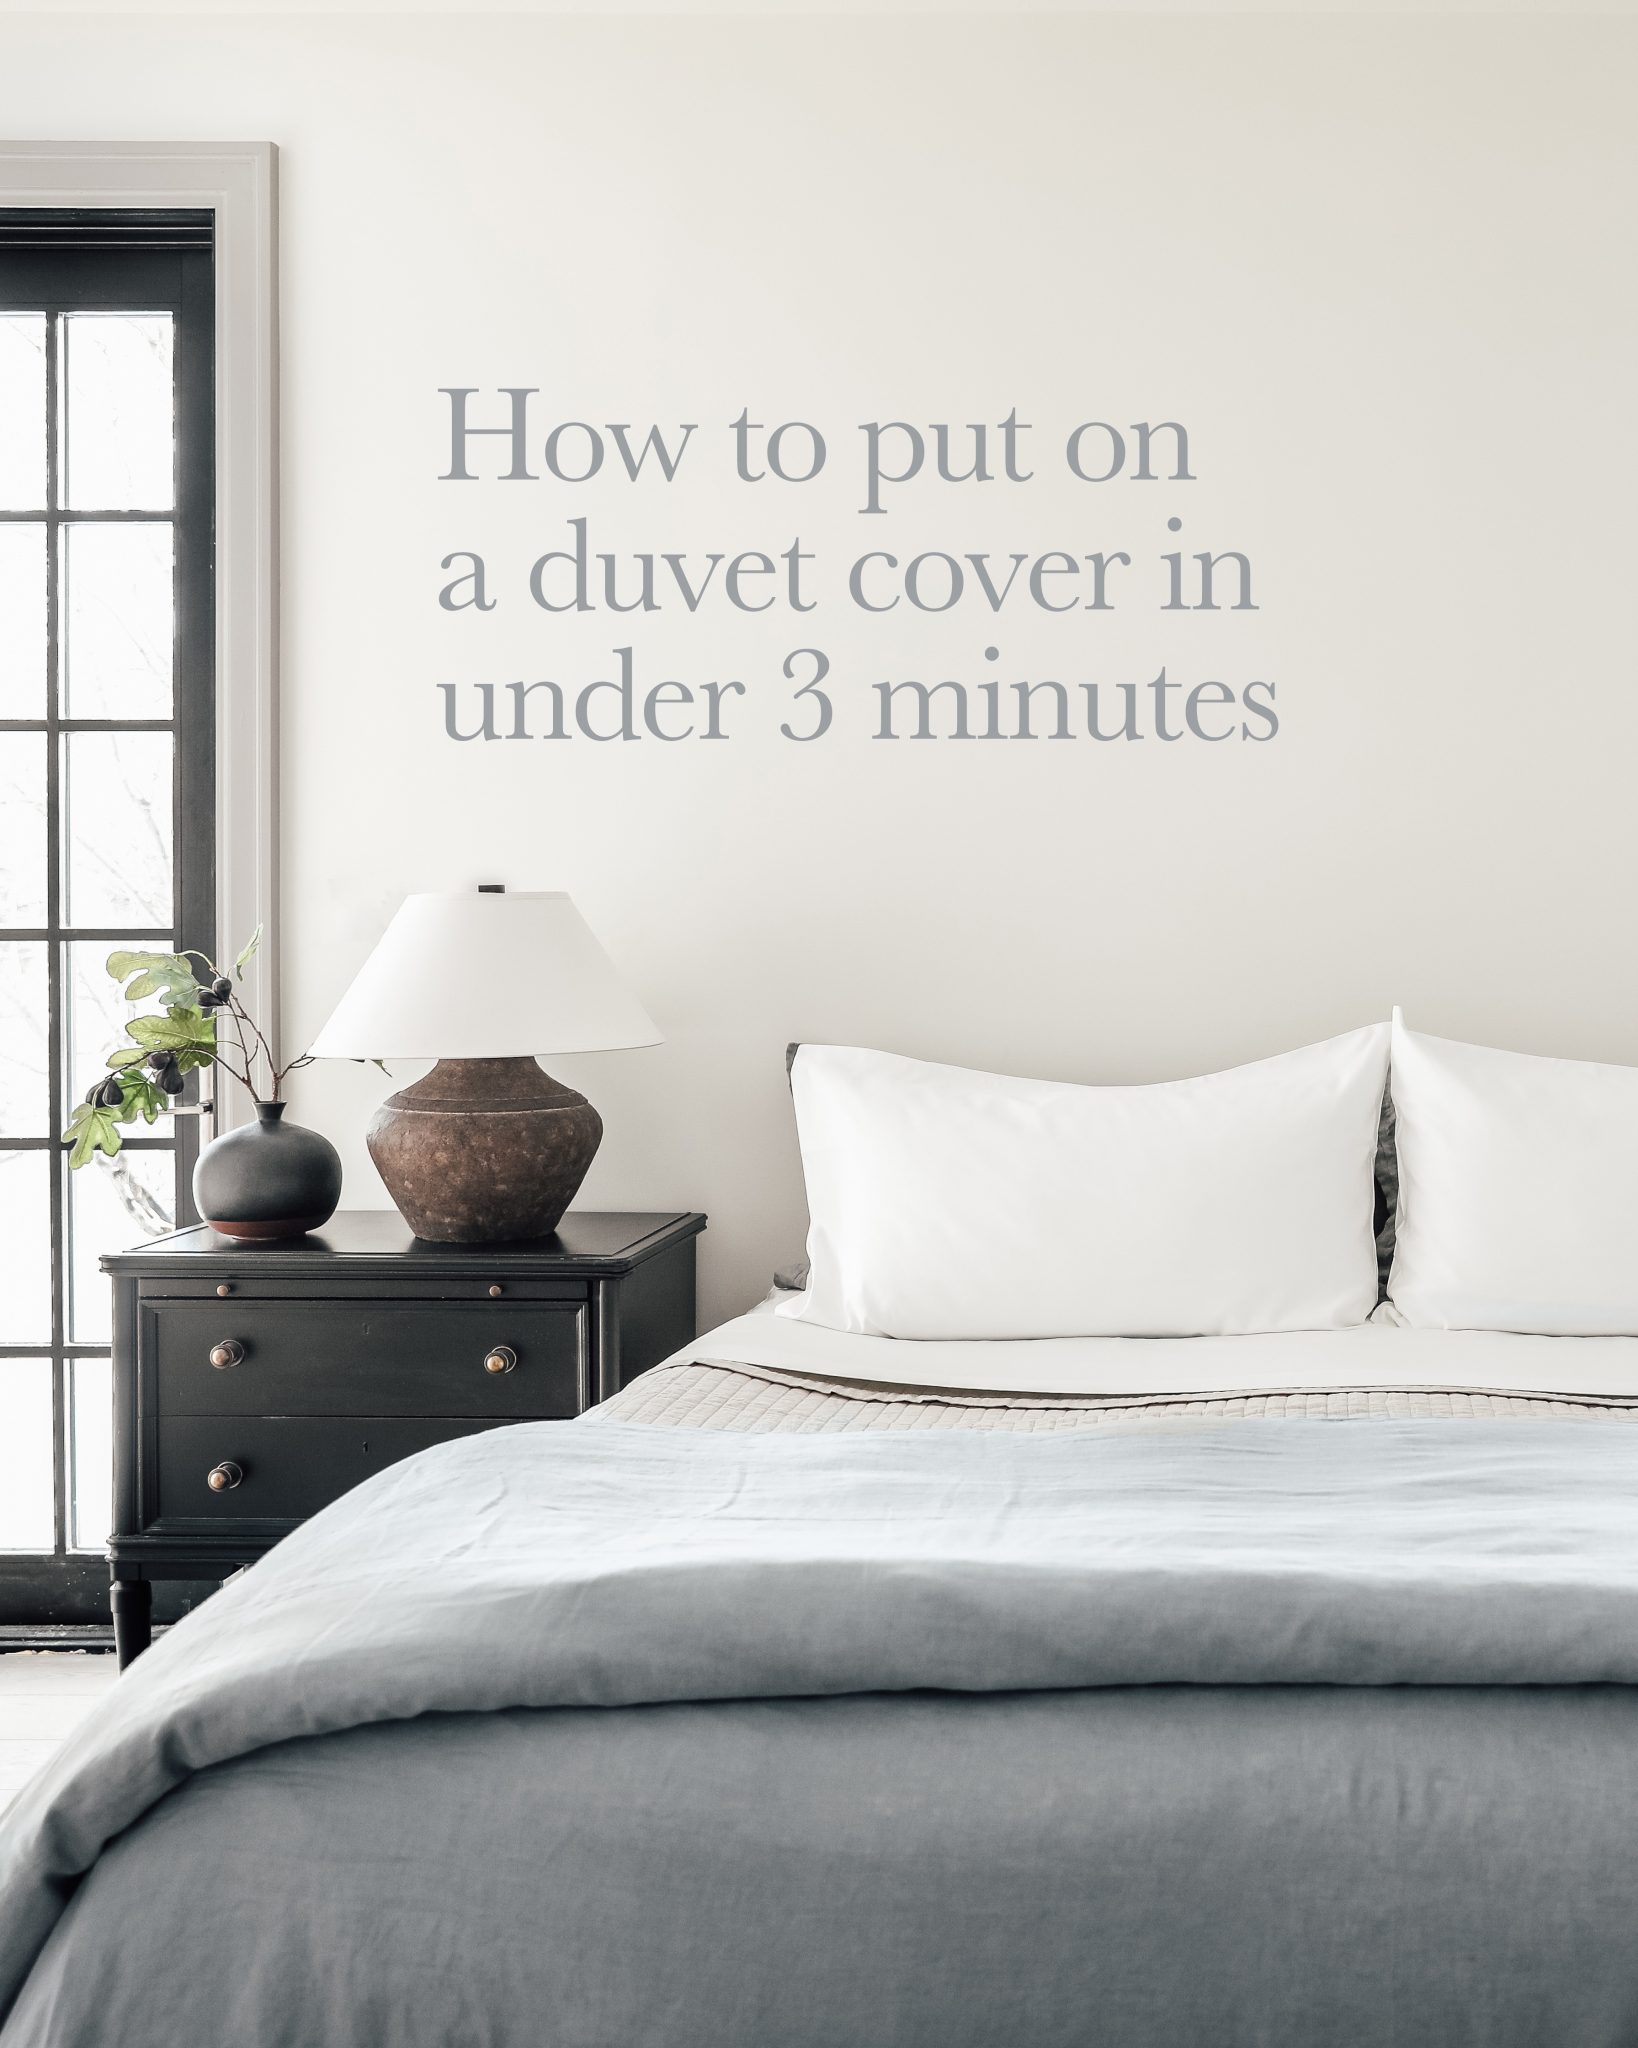 How To Put On A Duvet Cover In Under 3, What Does A Duvet Cover Go Over